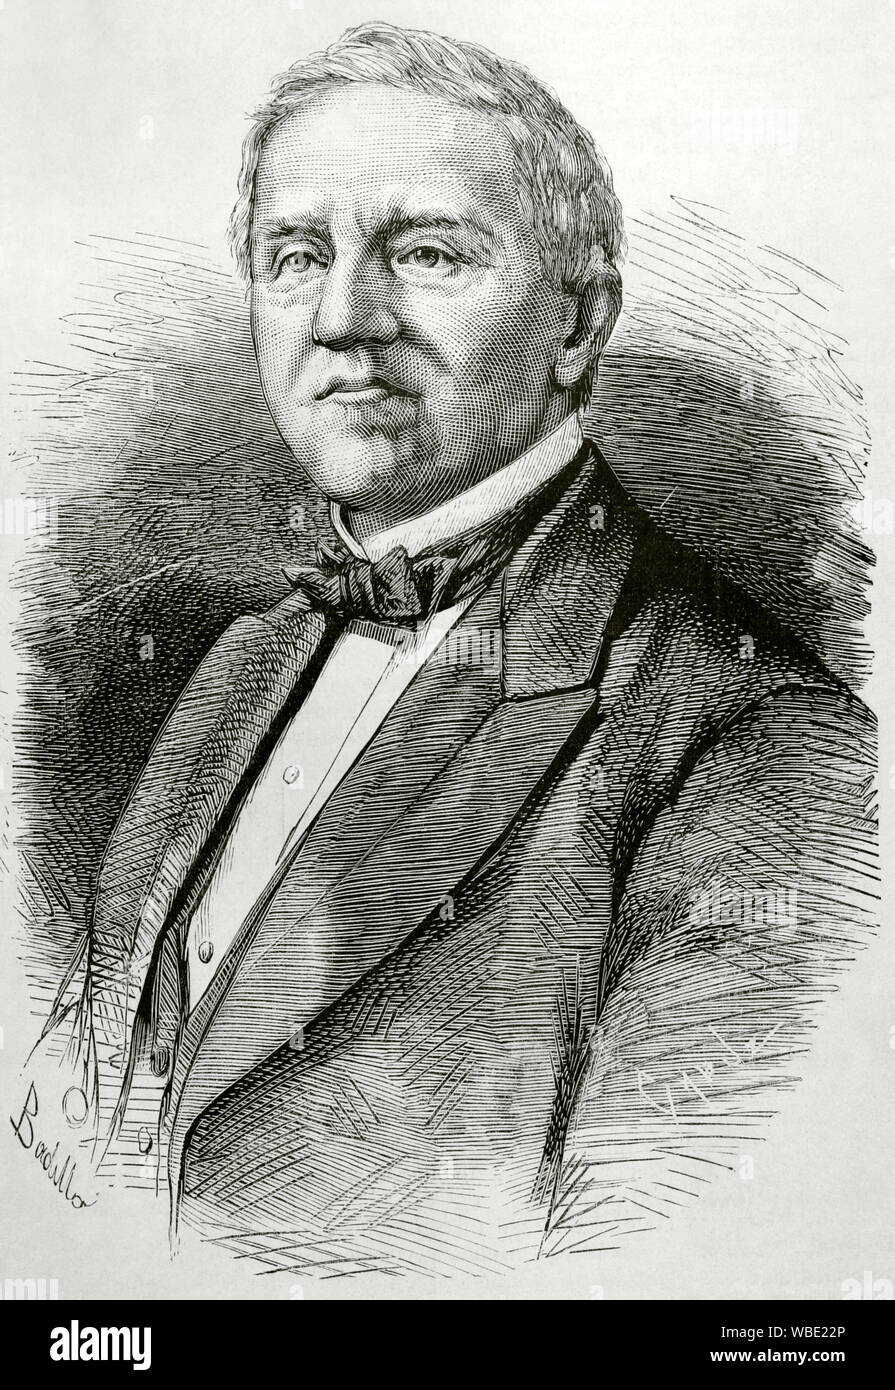 Samuel J. Tilden (1814-1886). Lawyer, governor of New York and Democratic presidential candidate in the disputed election of 1876. Drawing by Badillo. Engraving by Capuz. La Ilustracion Española y Americana, September 8, 1876. Stock Photo